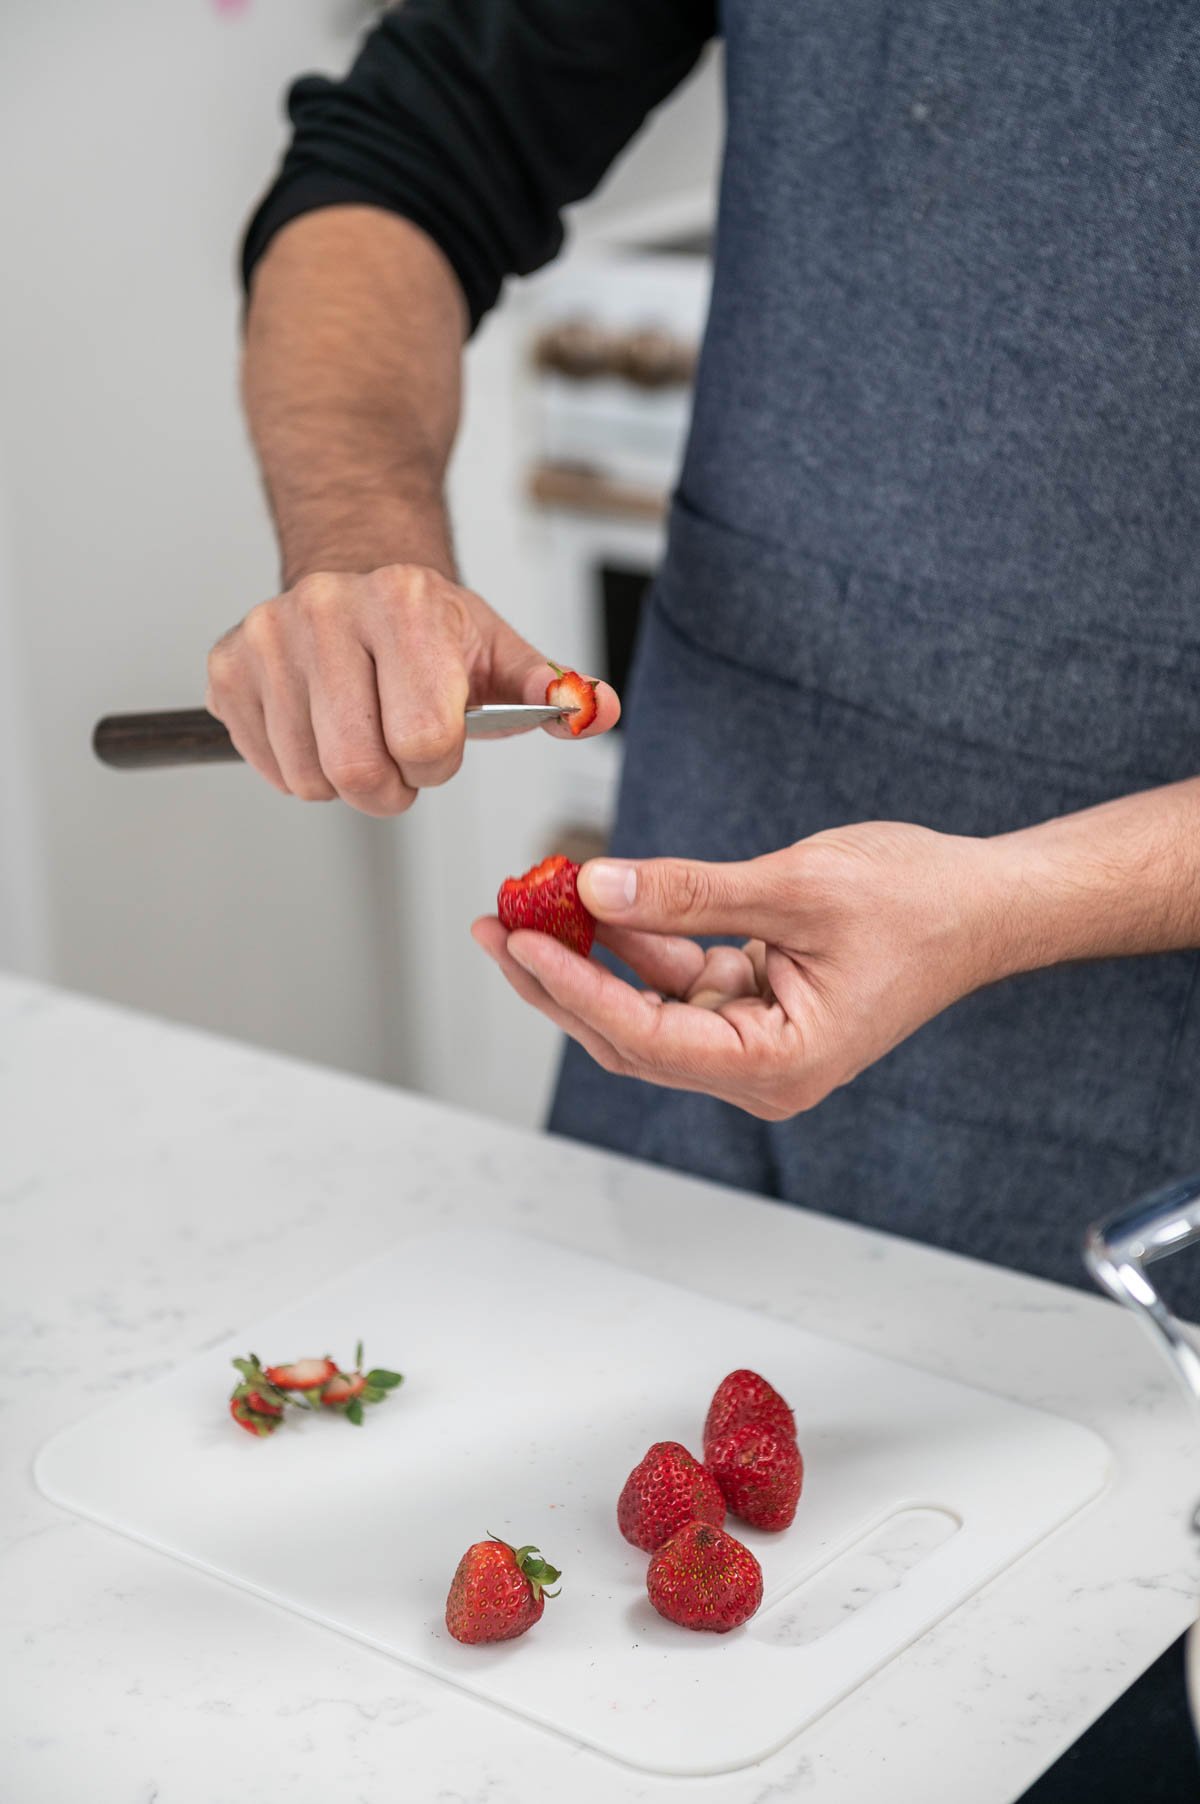 hand shown cutting a strawberry